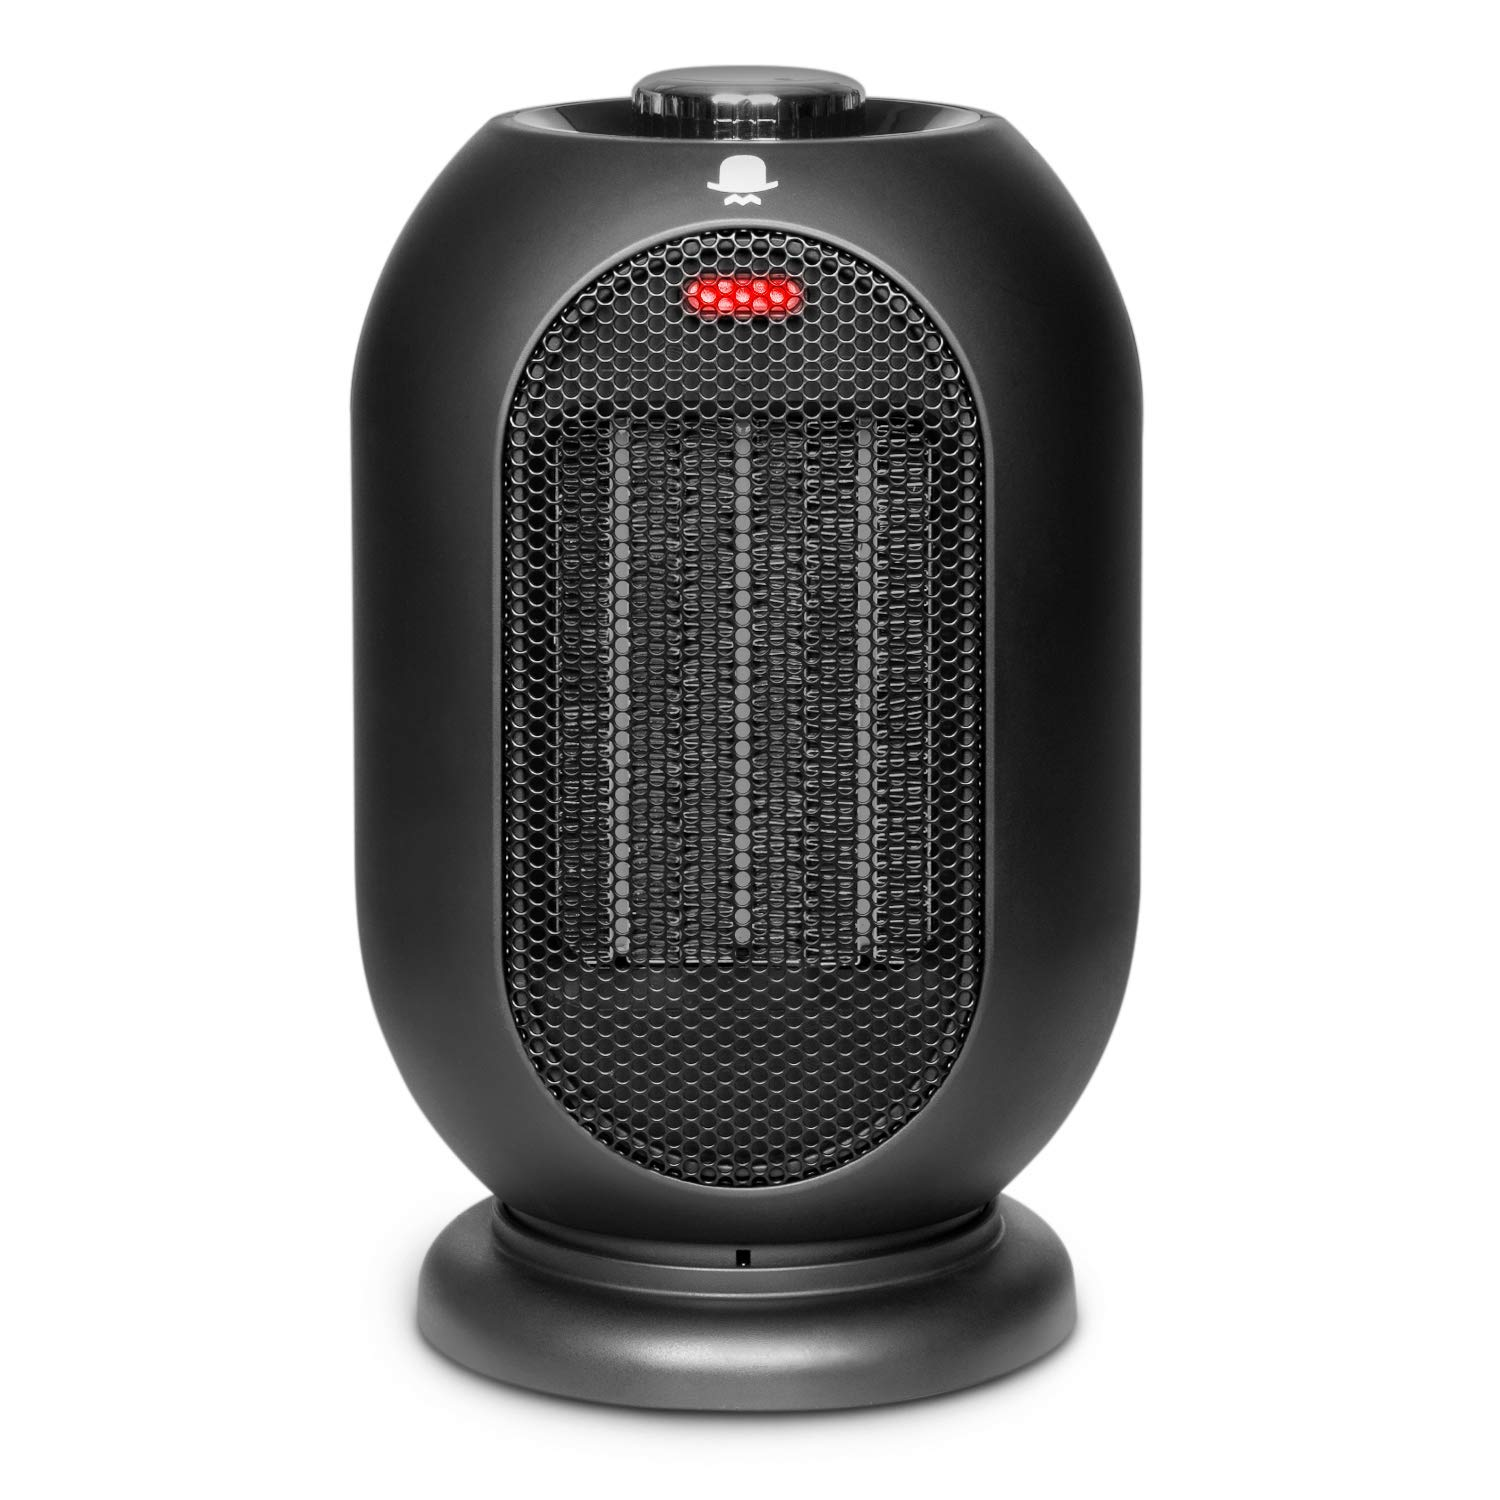 MrMikki Portable Space Heater Only $29.99 Shipped!